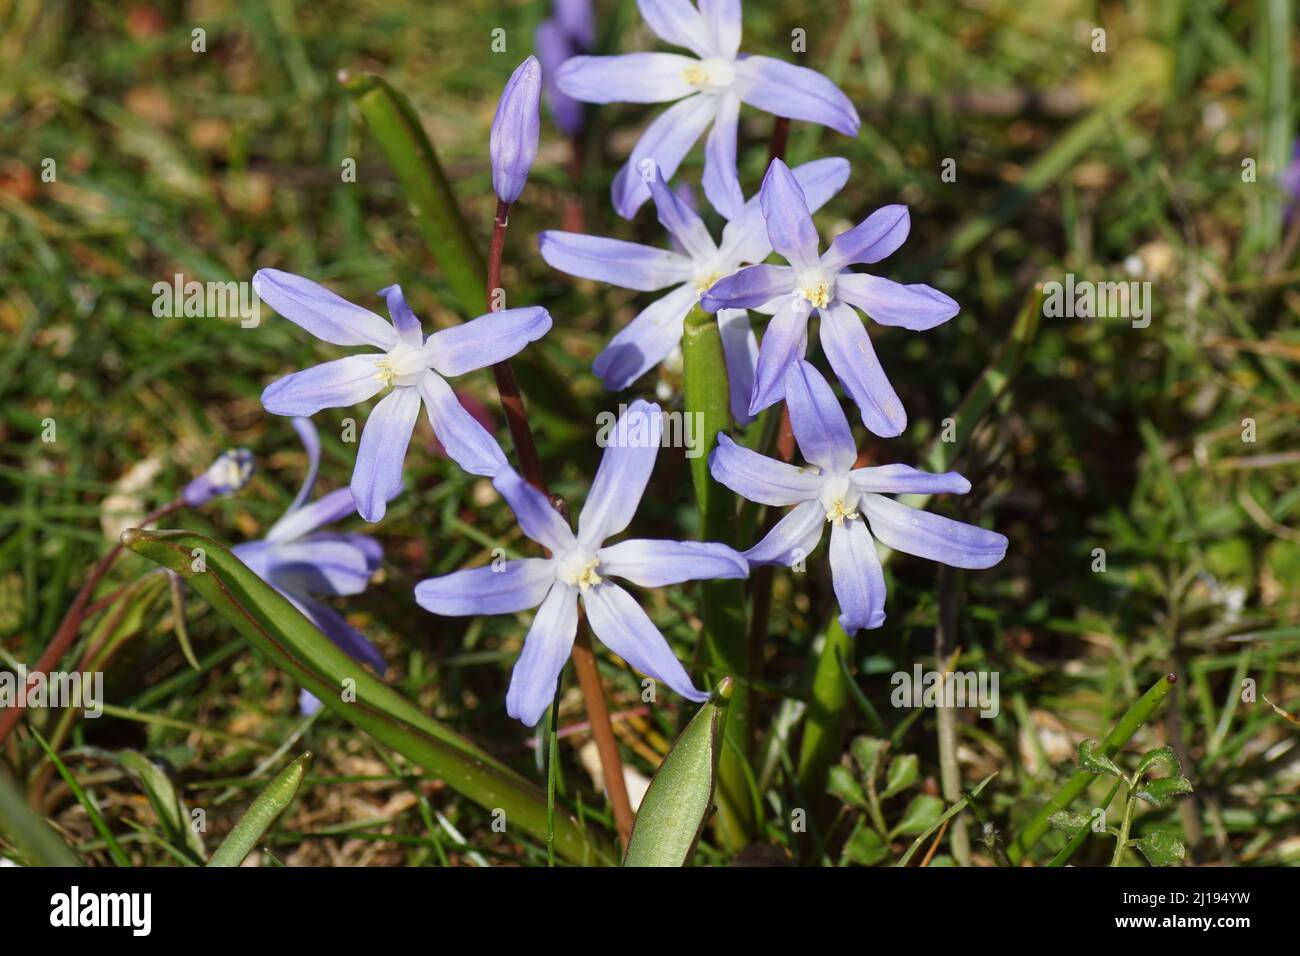 Close up of flowering Glory of the Snow (Chionodoxa luciliae), subfamily Scilloideae, family Asparagaceae. Between blurred leaves of grass. Stock Photo